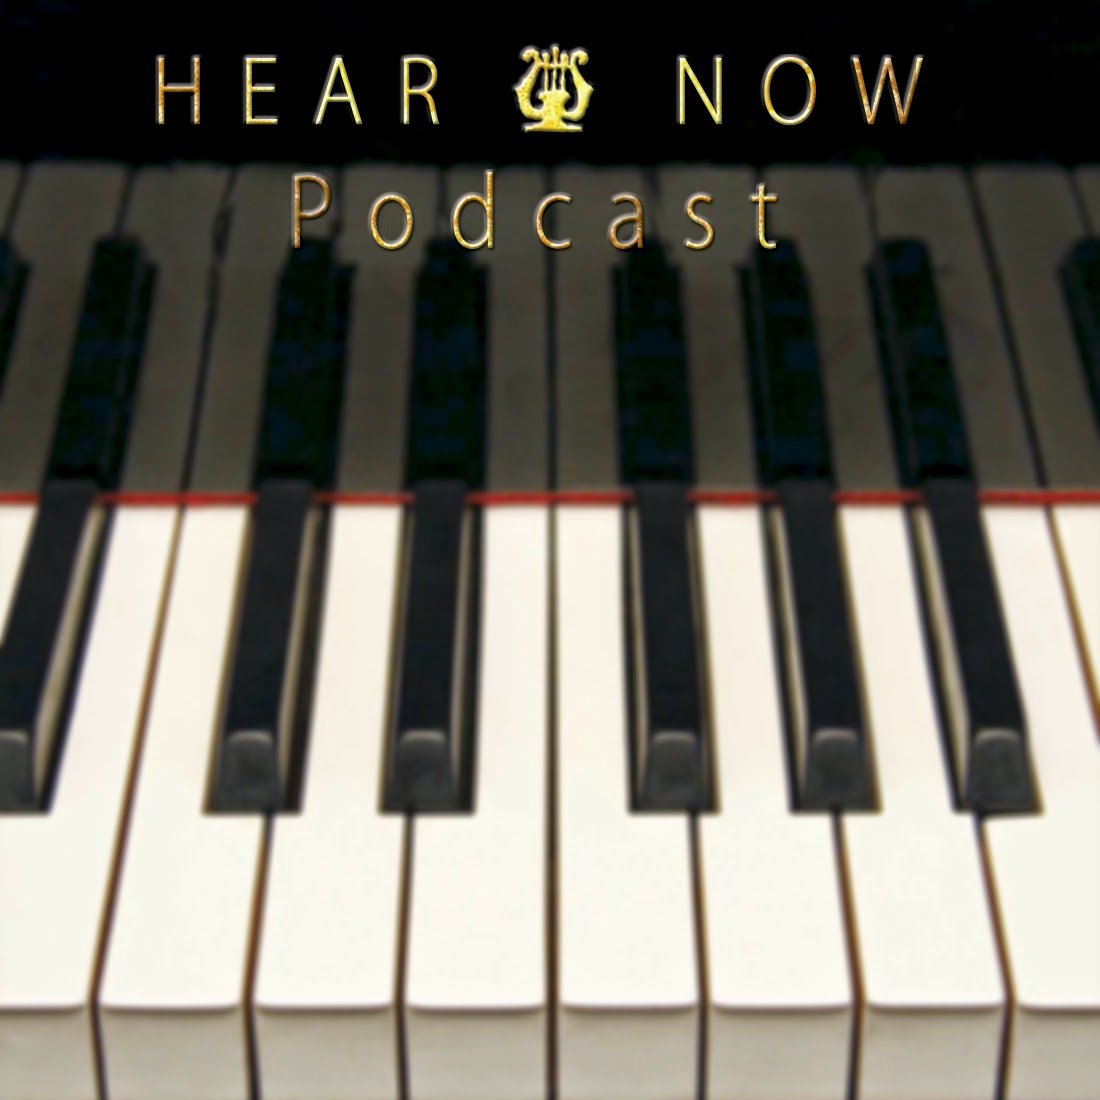 Hear and Now Podcast